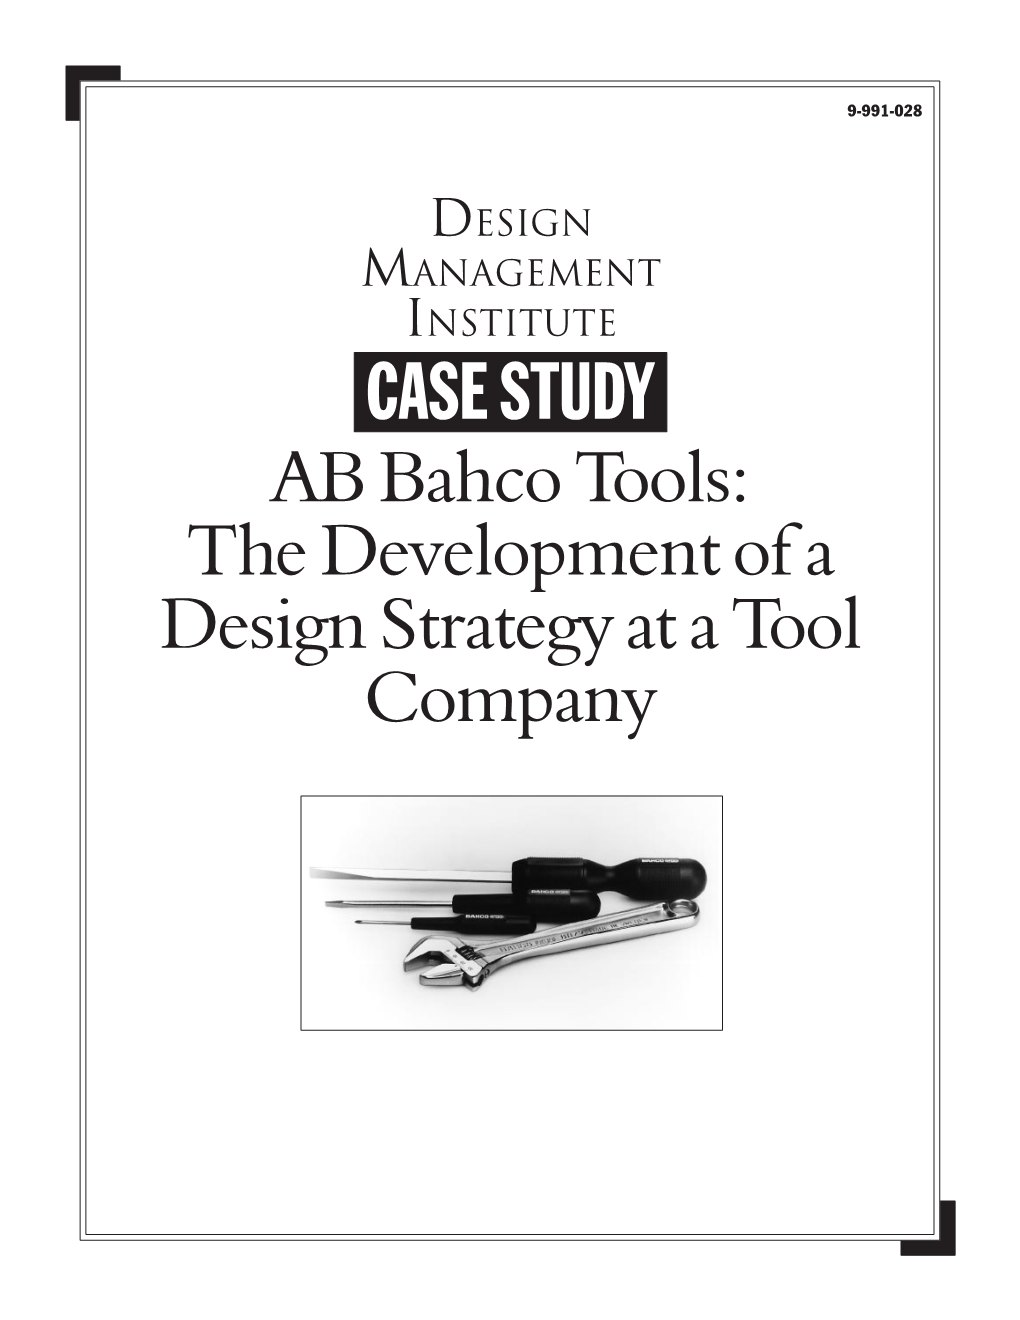 AB Bahco Tools the Development of a Design Strategy at A